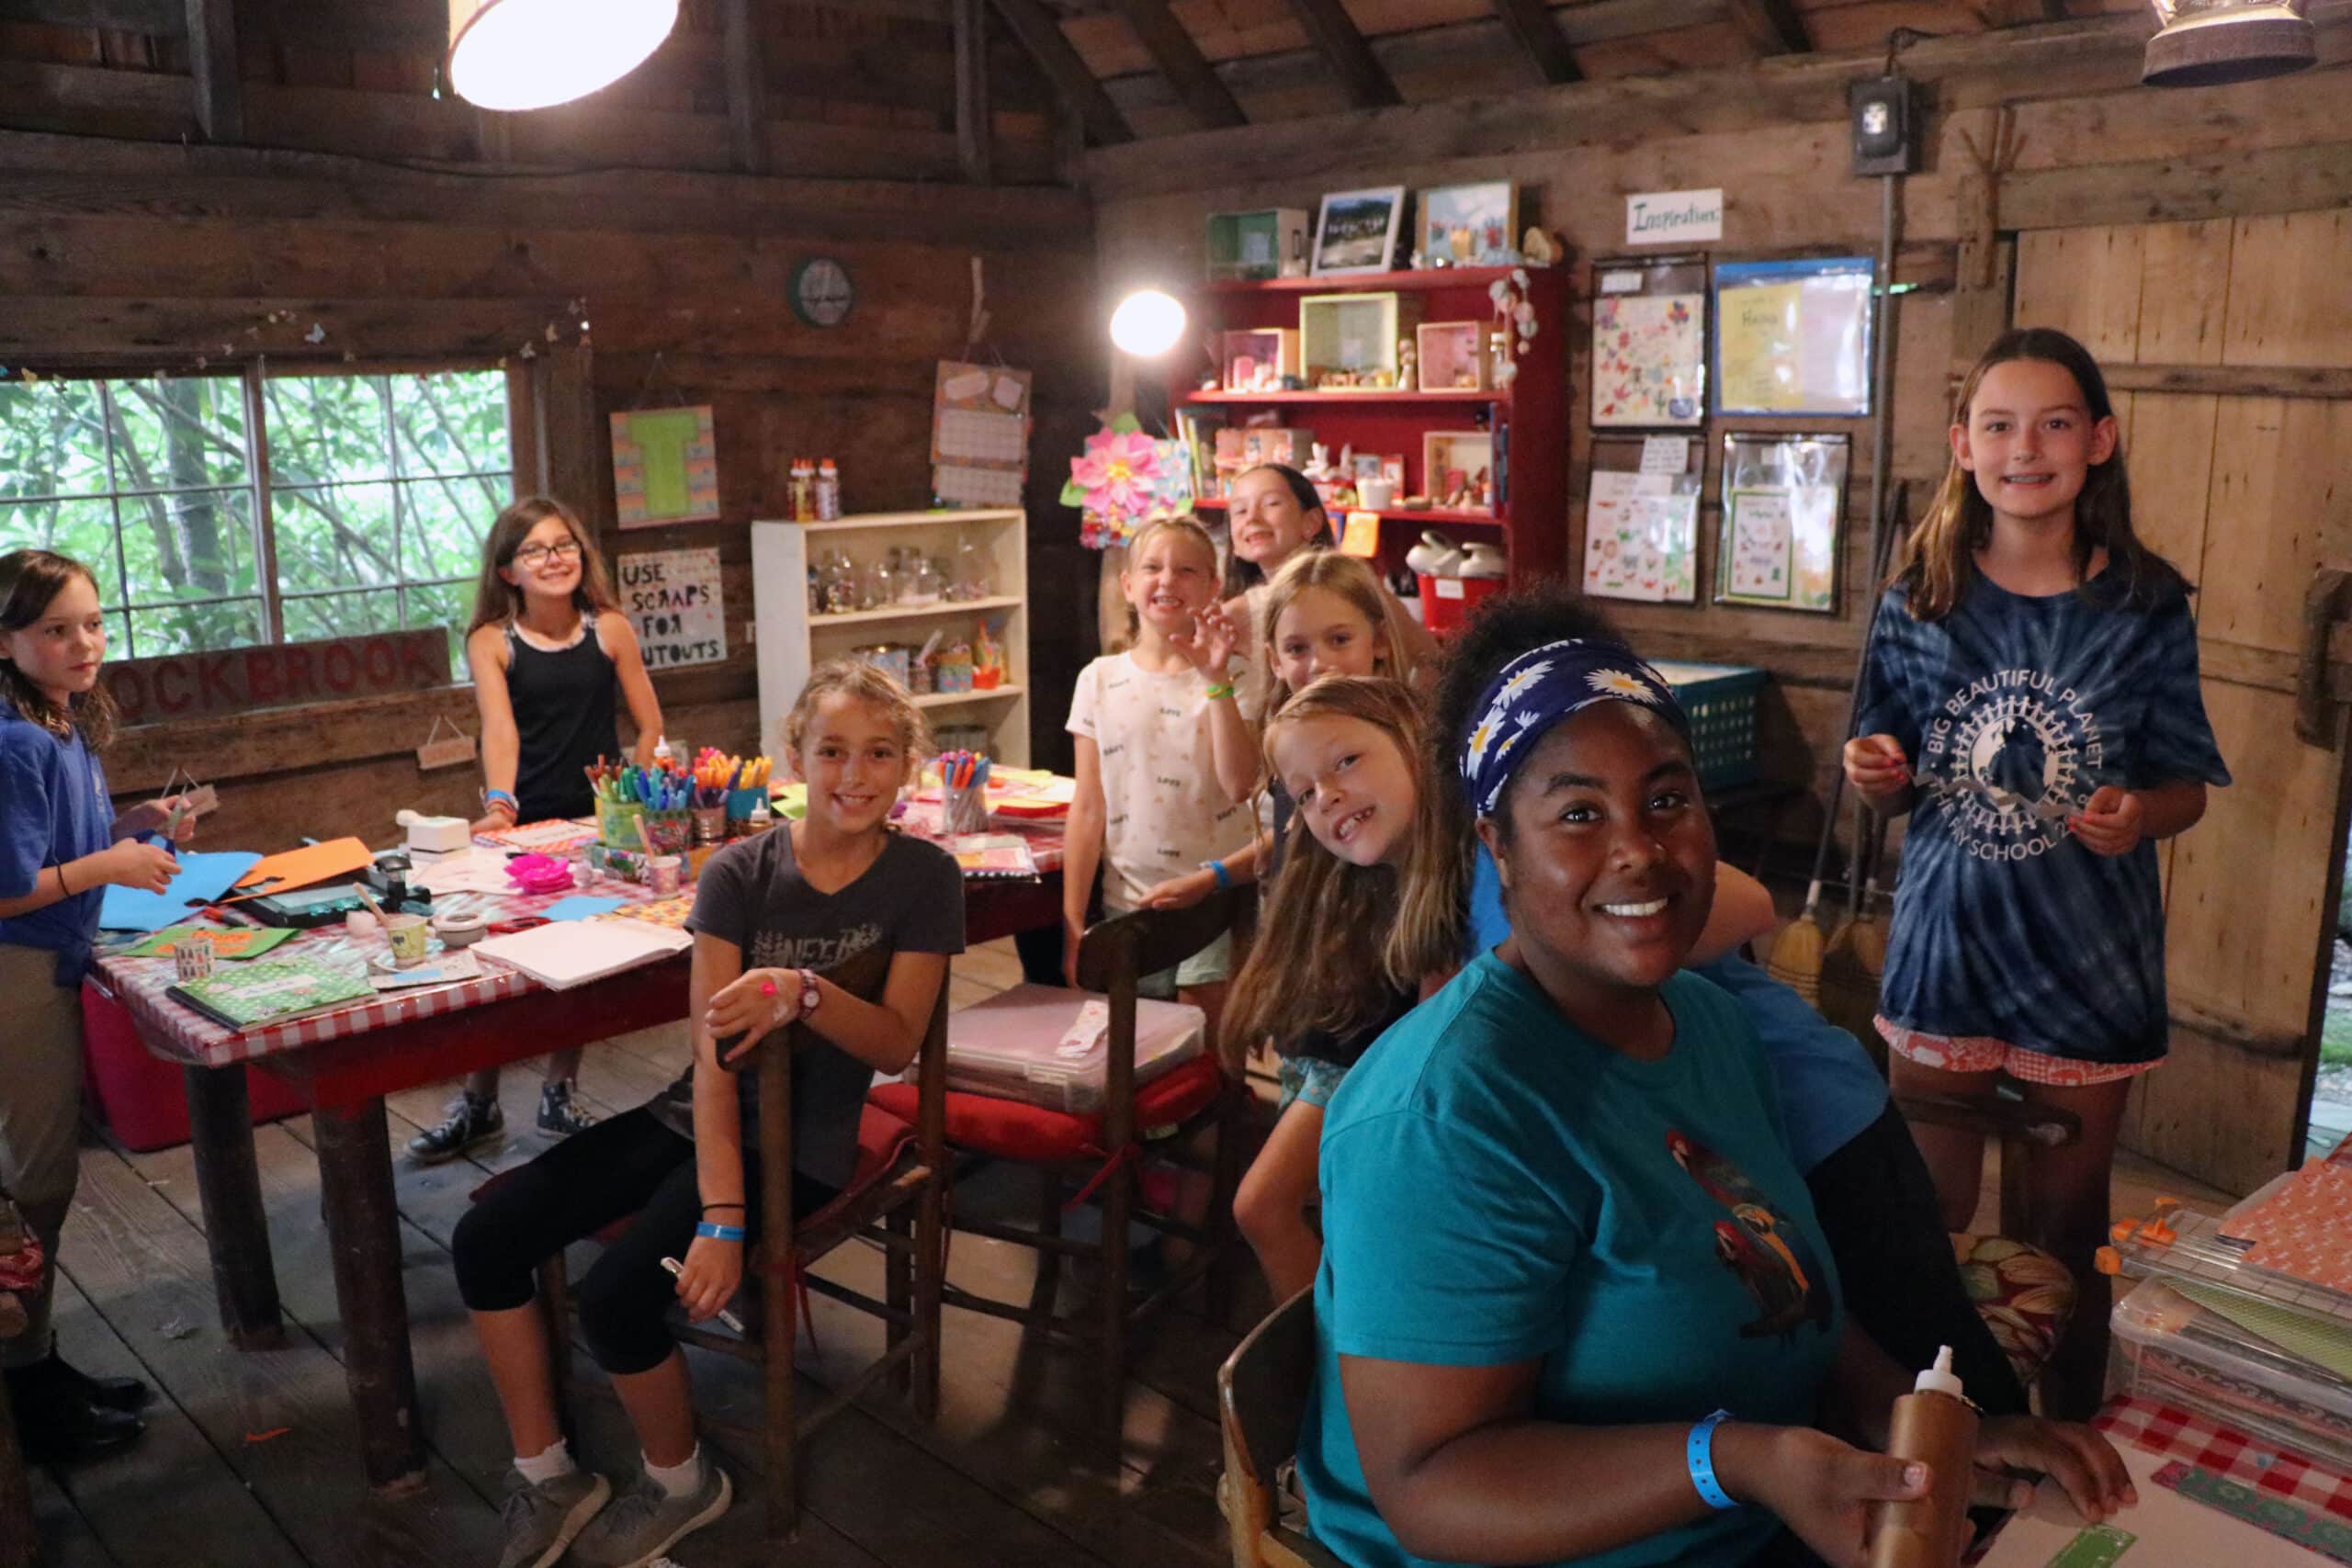 Girls in arts and crafts cabin